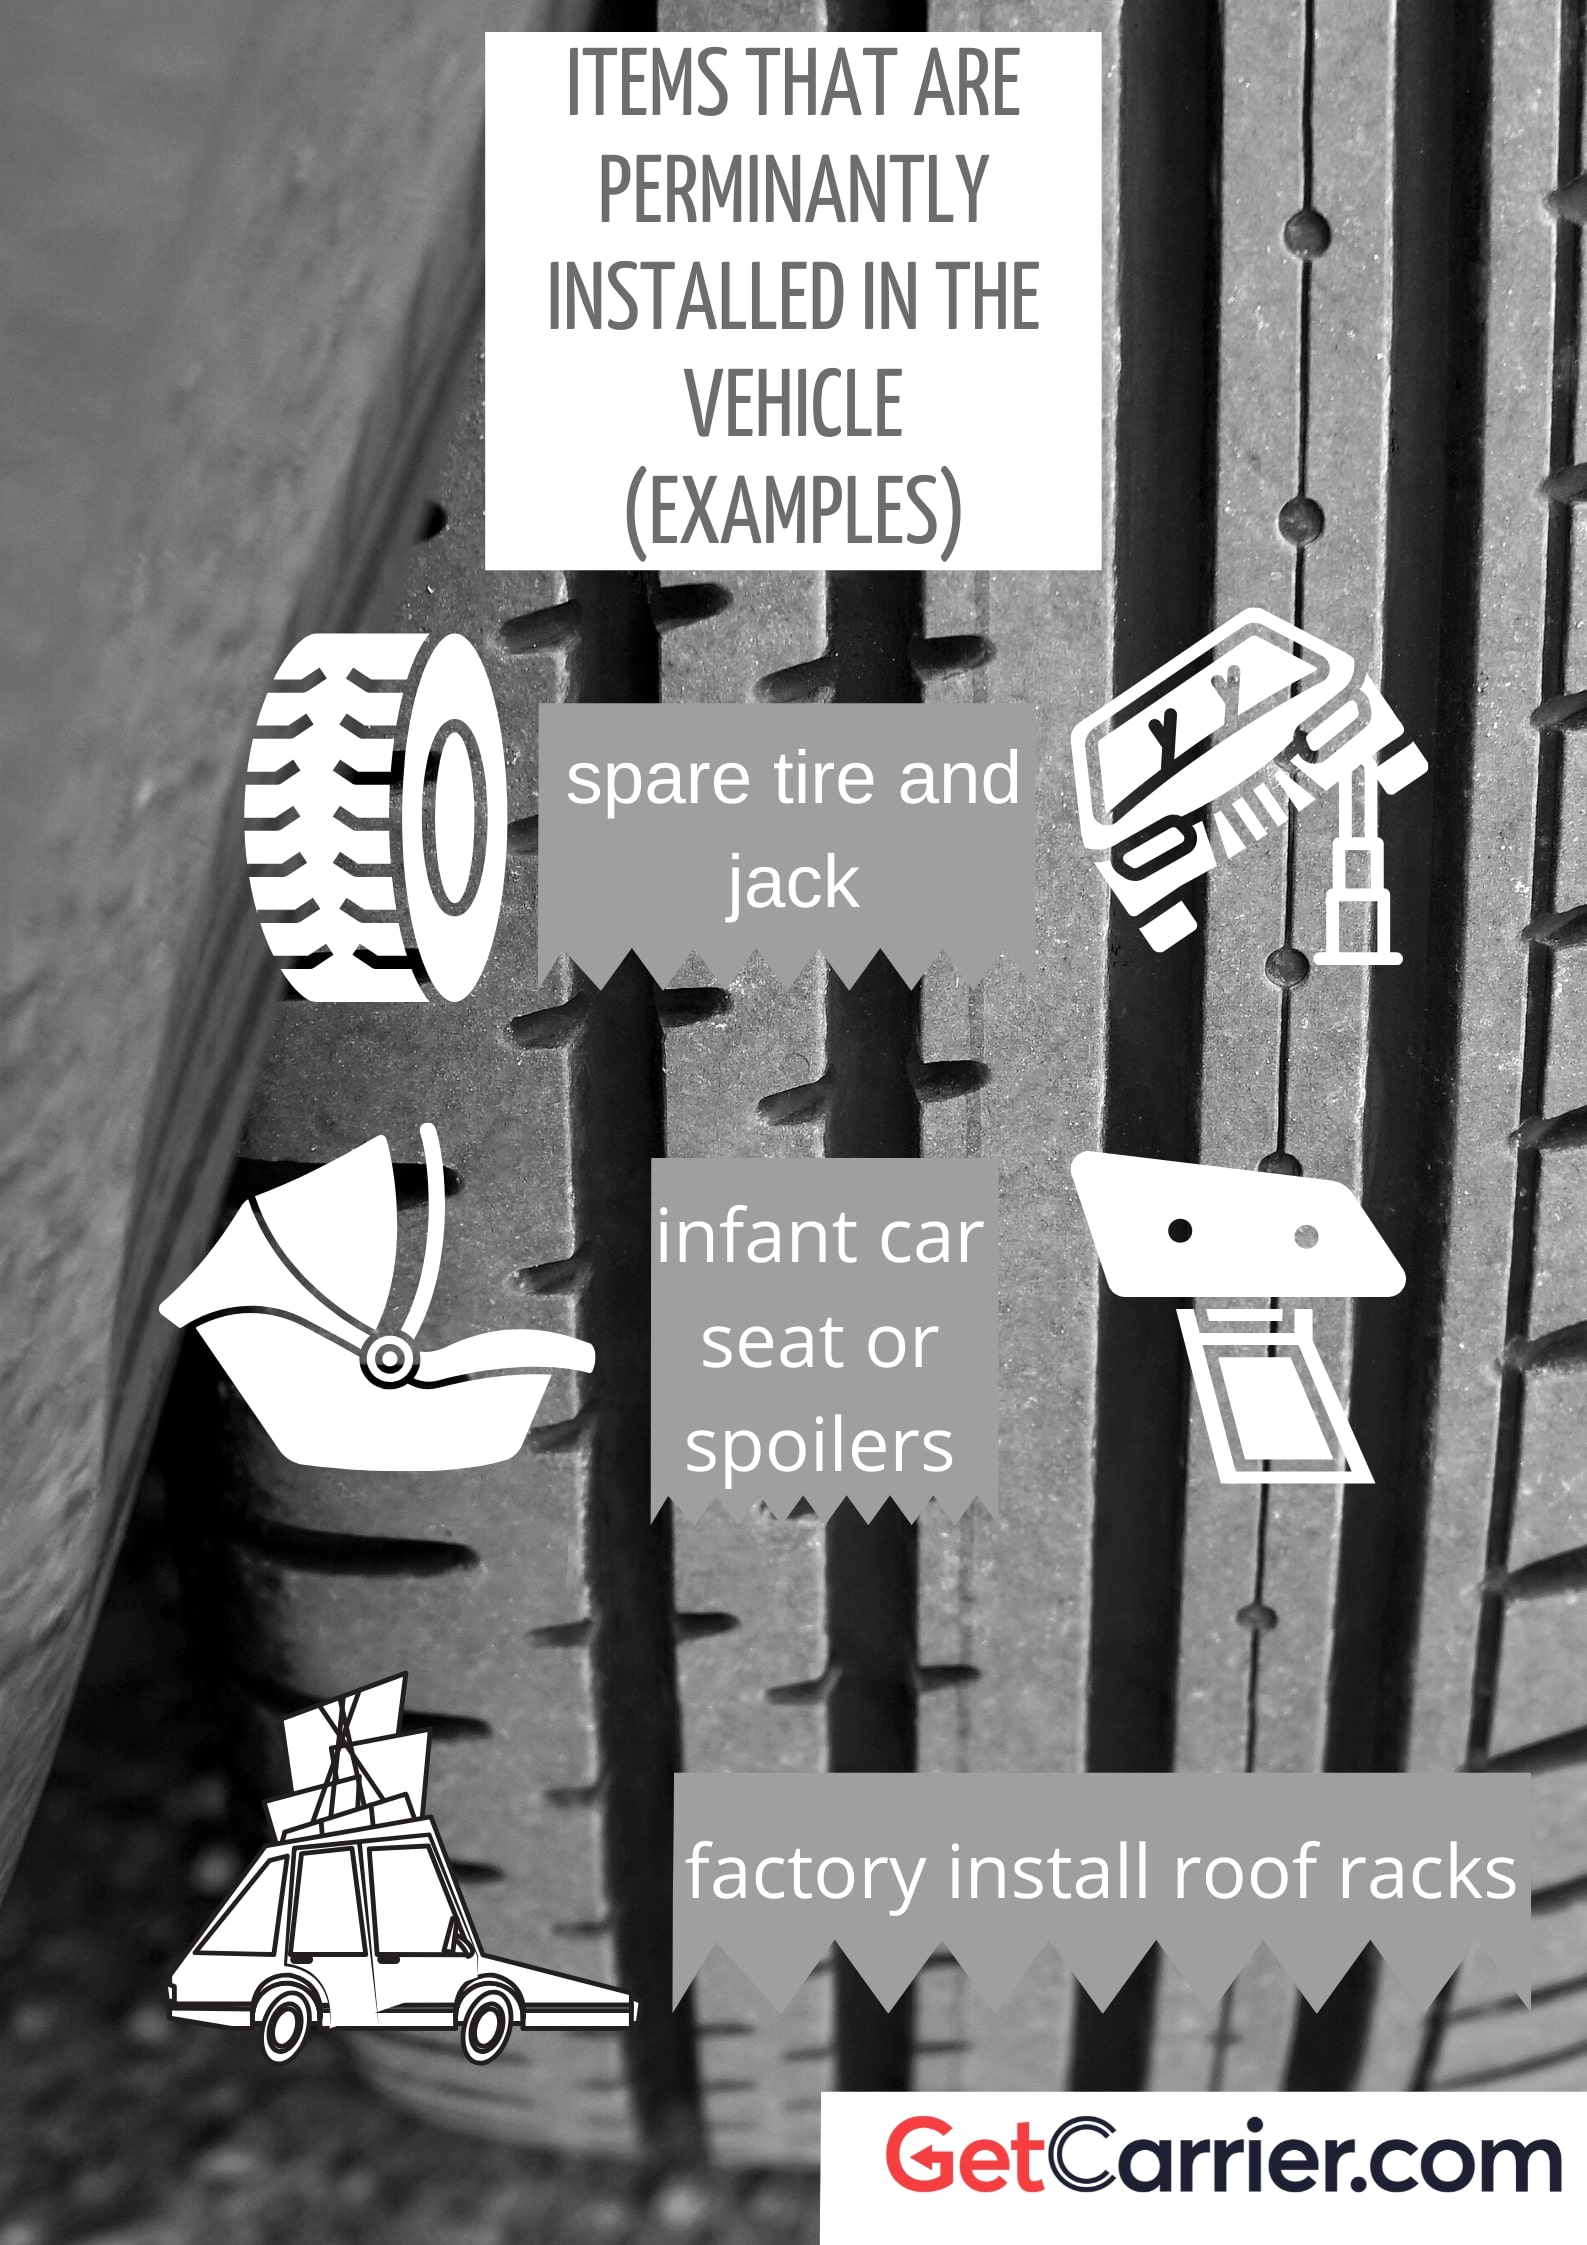 Examples of items perminantly installed in the vehicle